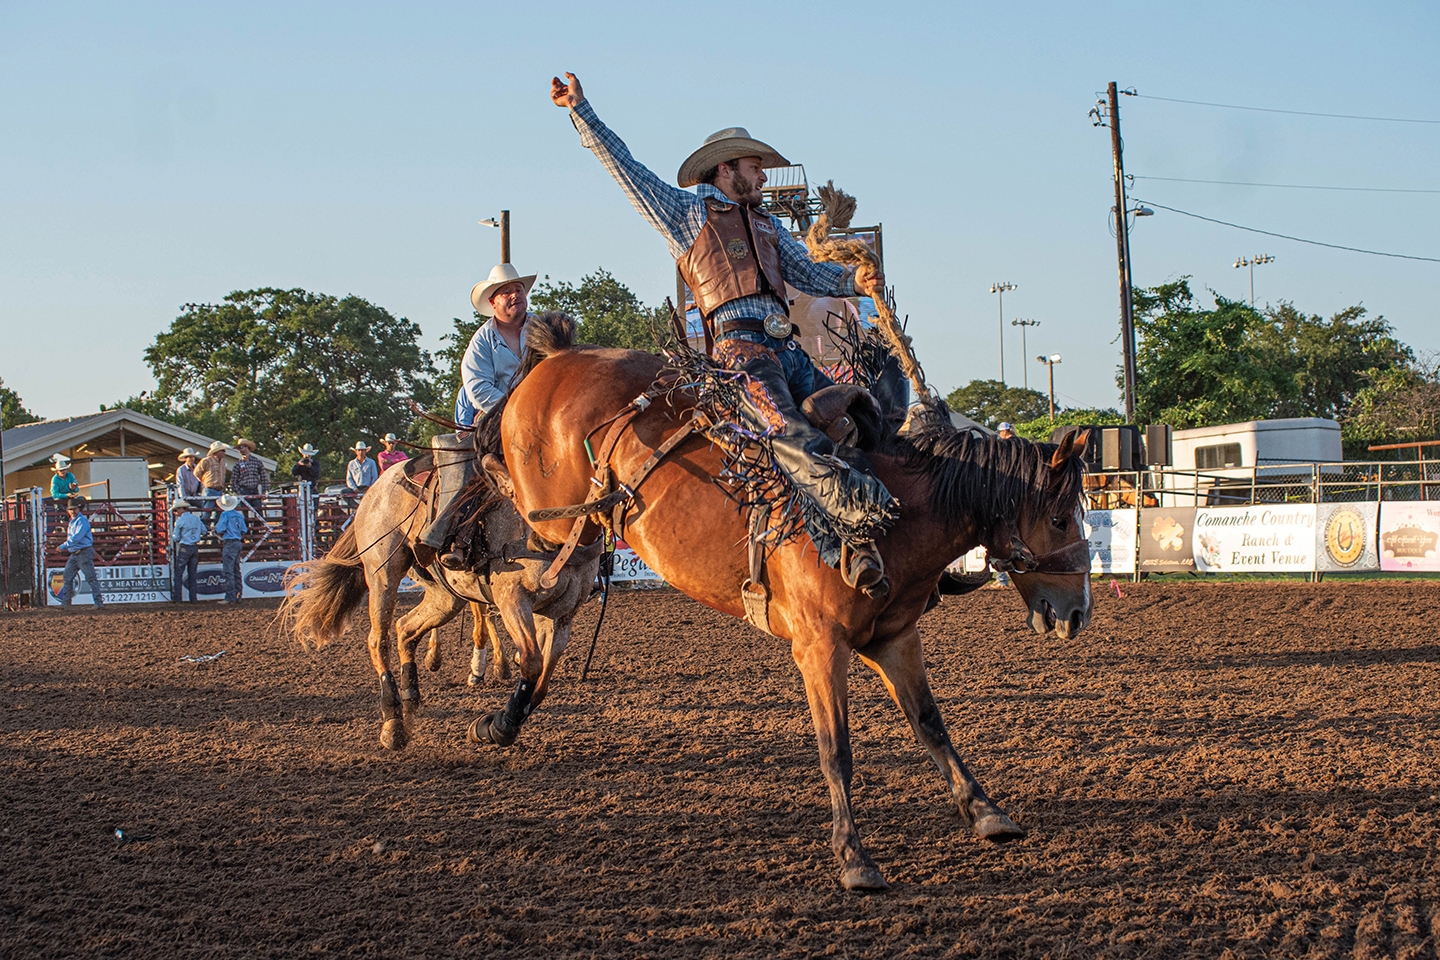 Want to see photos of the Chisholm Trail Roundup? Post Register